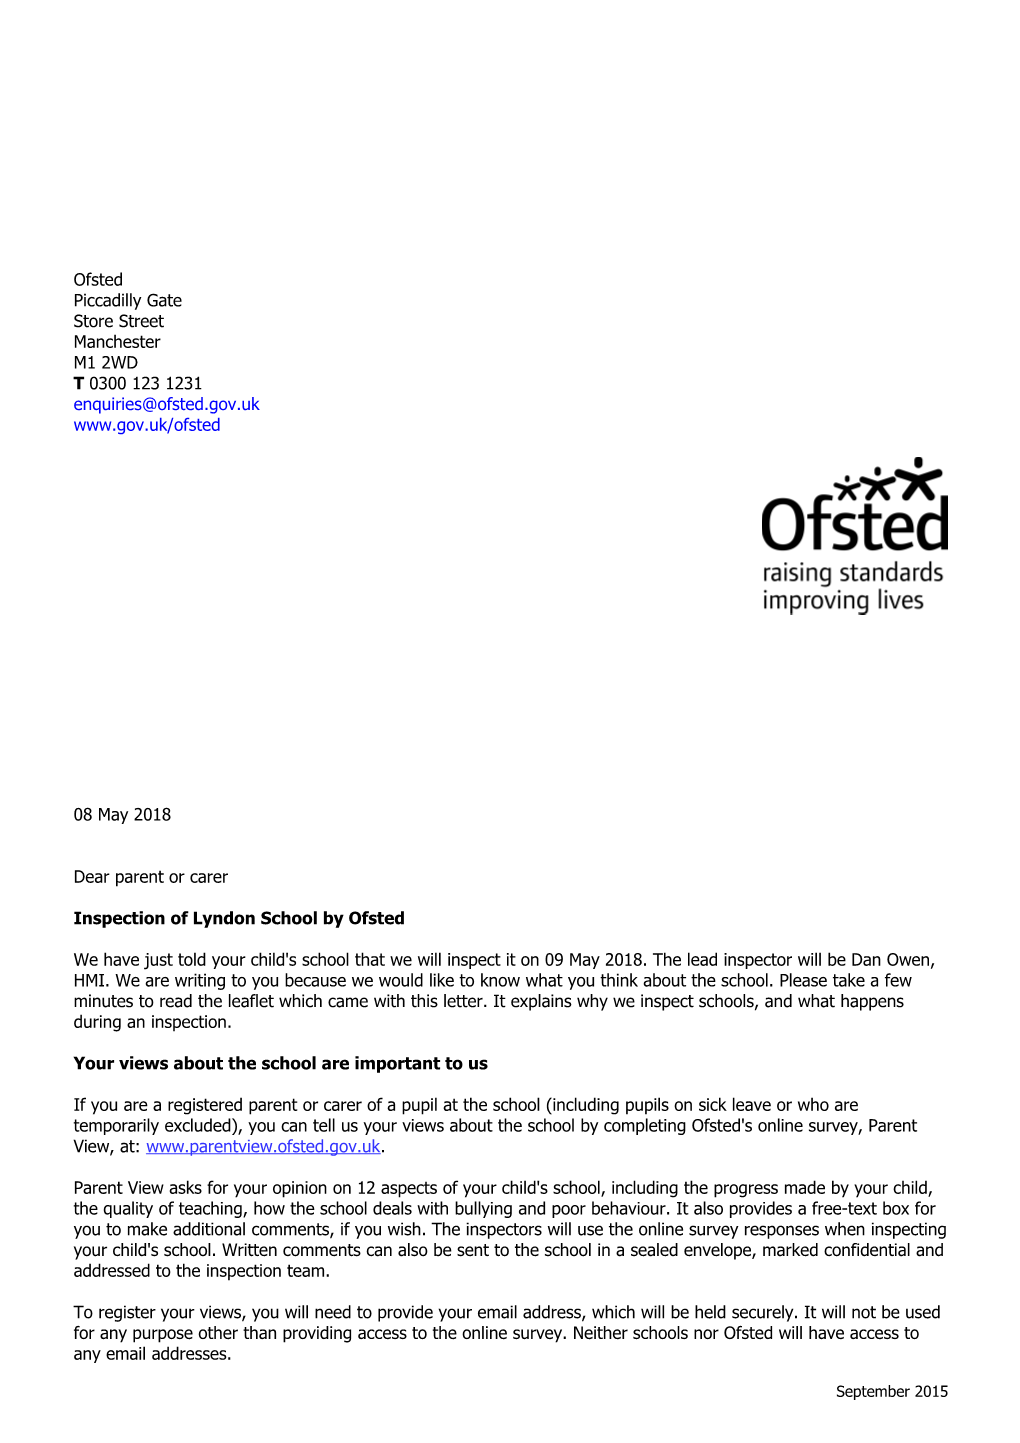 Inspection of Lyndon School by Ofsted